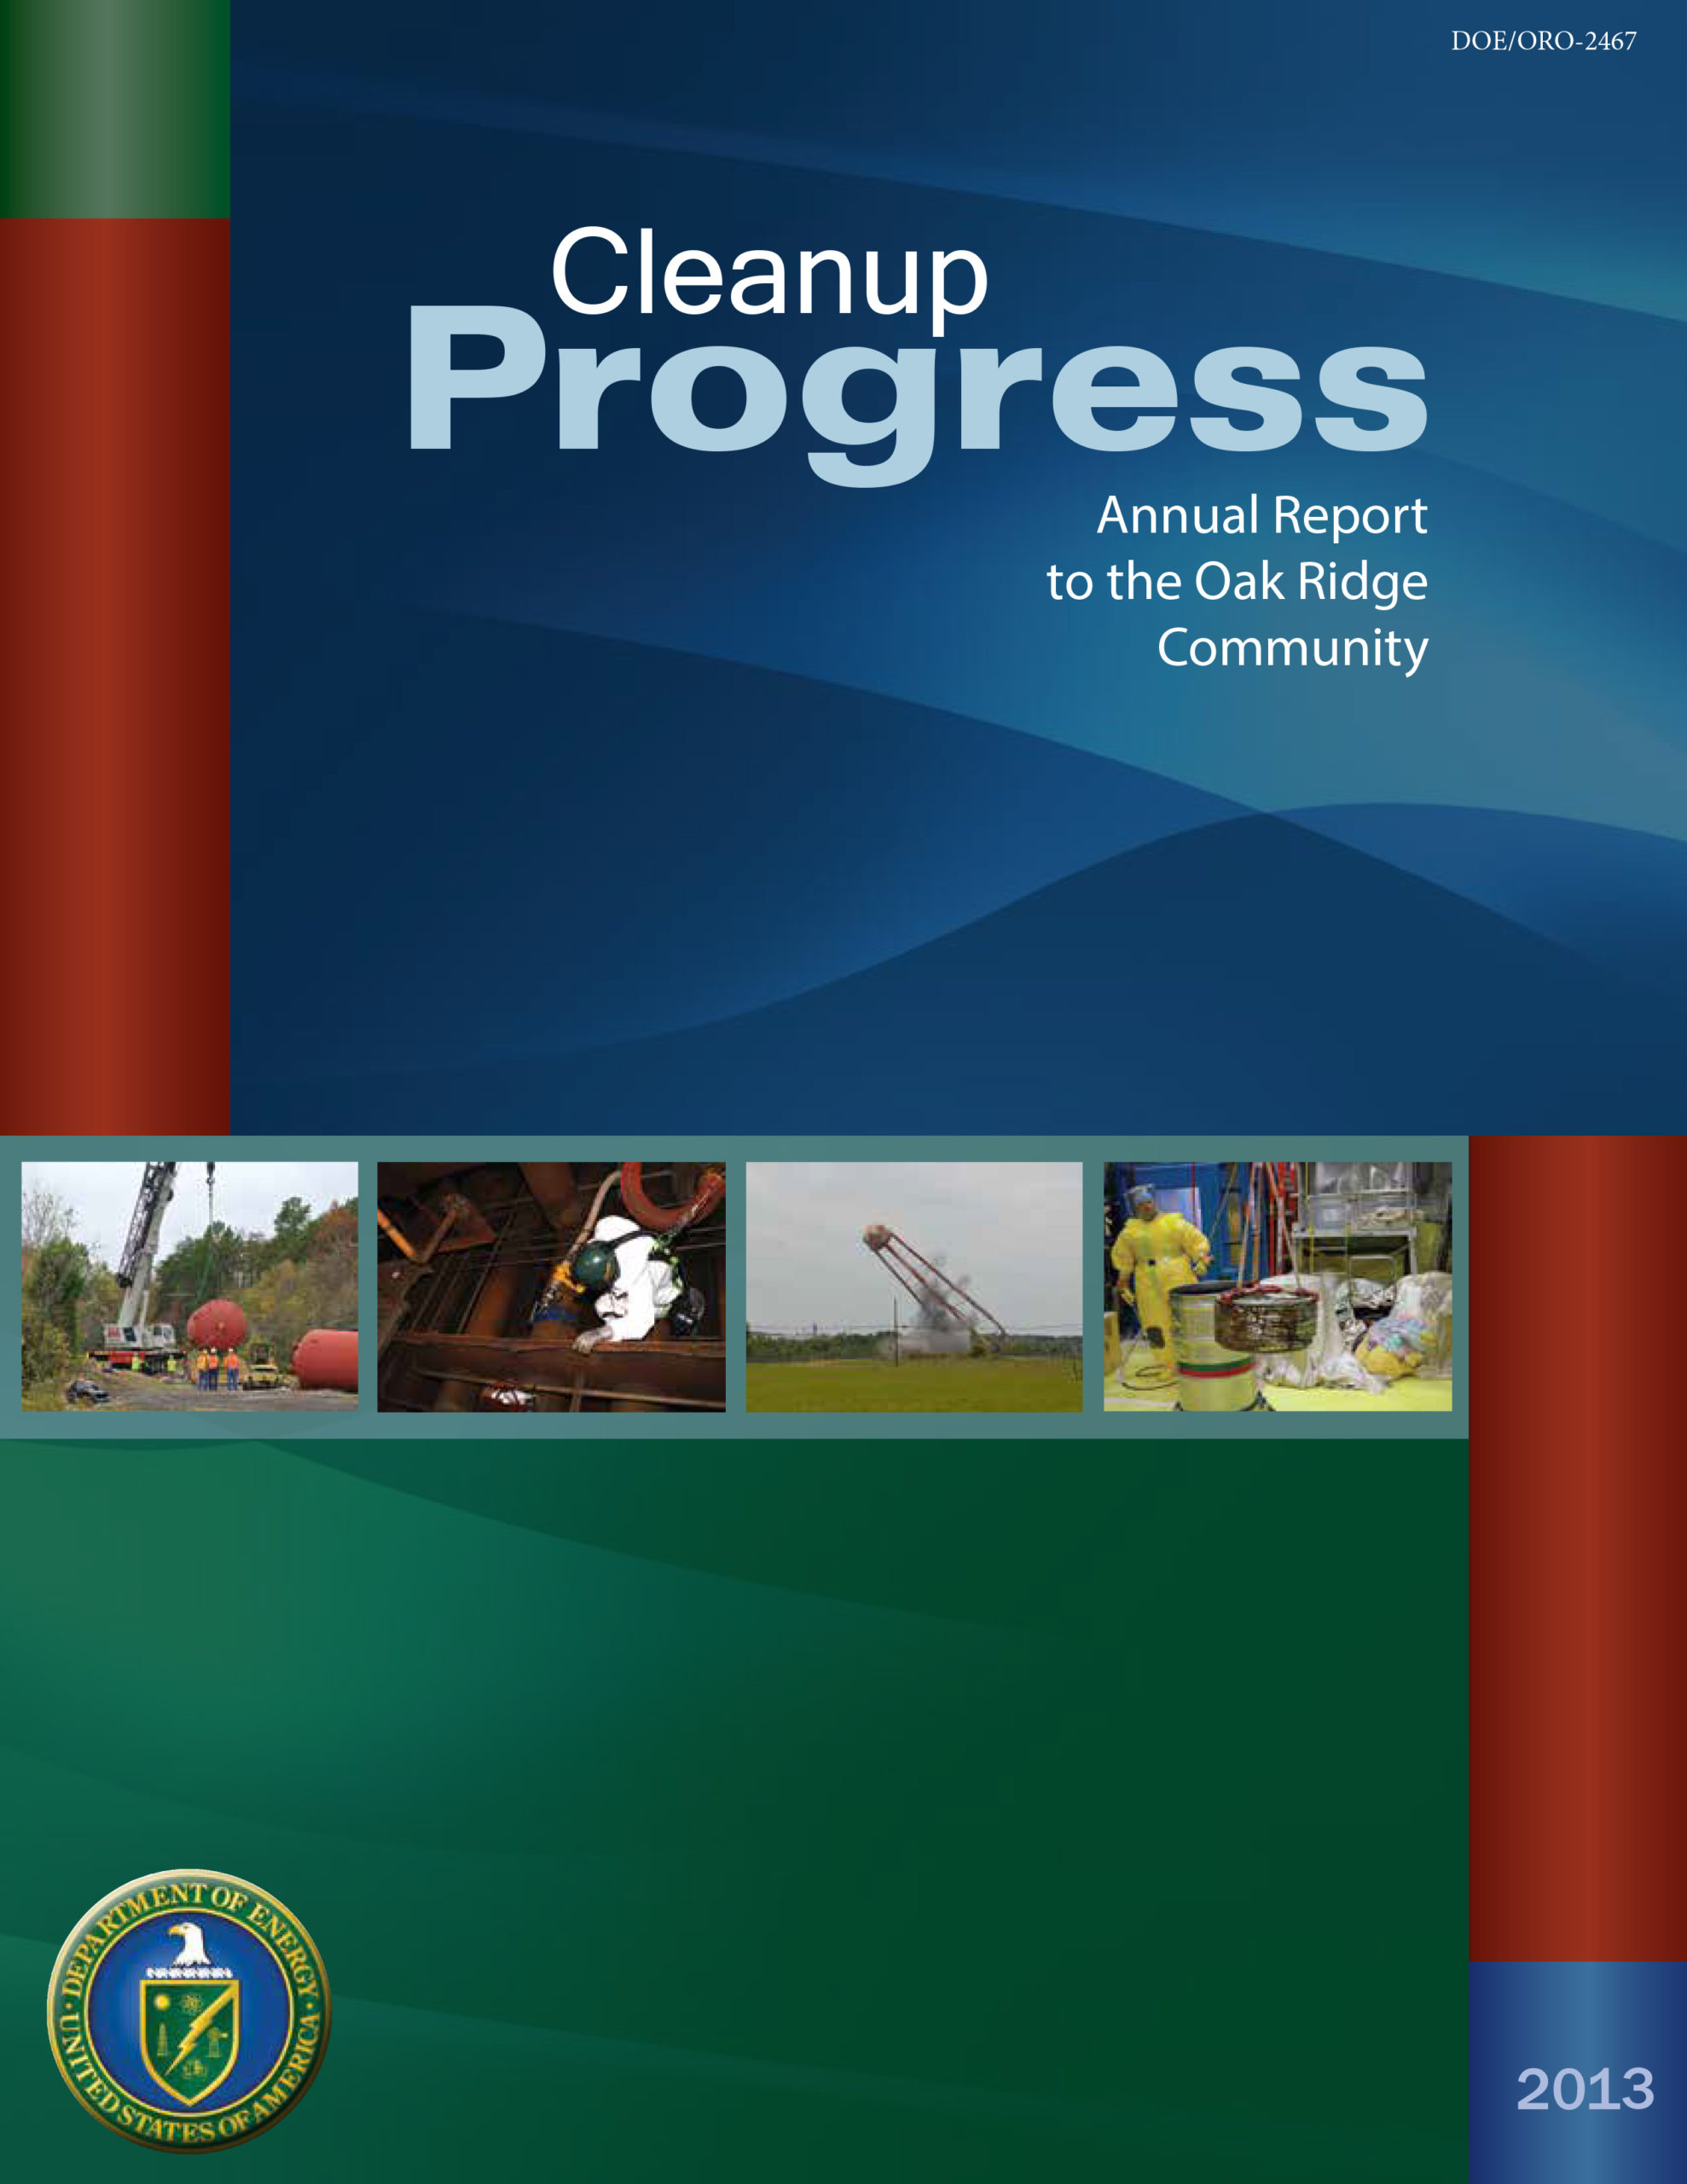 2013 Cleanup Progress cover